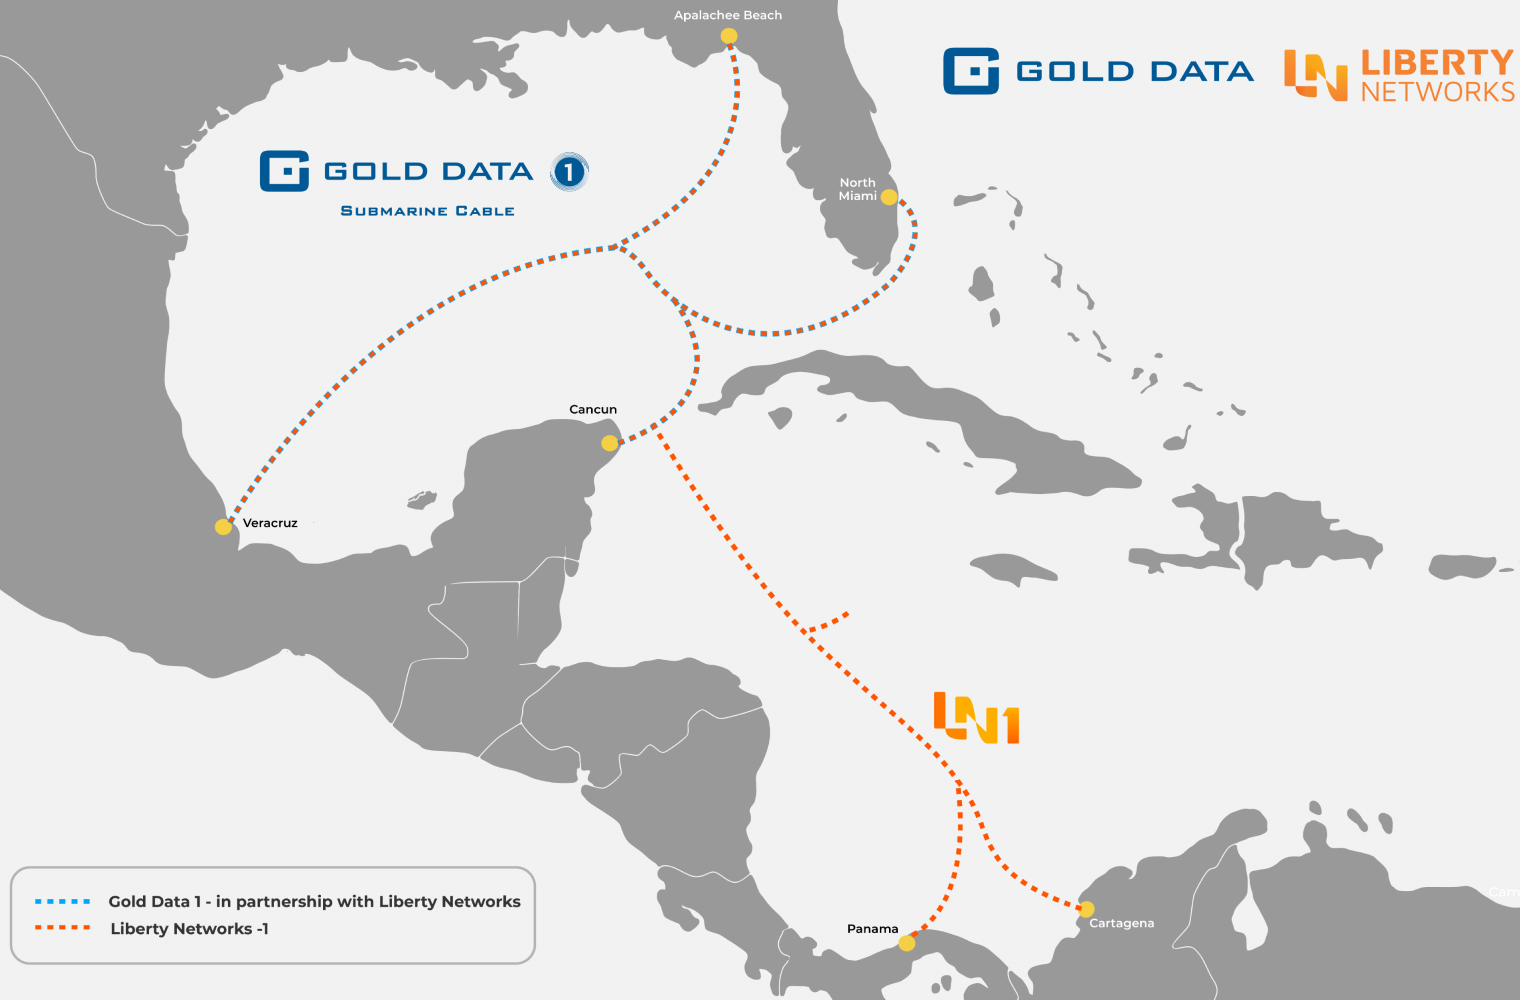 LIBERTY NETWORKS AND GOLD DATA ANNOUNCE COLLABORATION TO DEVELOP A NEW PAN-REGIONAL SUBSEA CABLE SYSTEM 